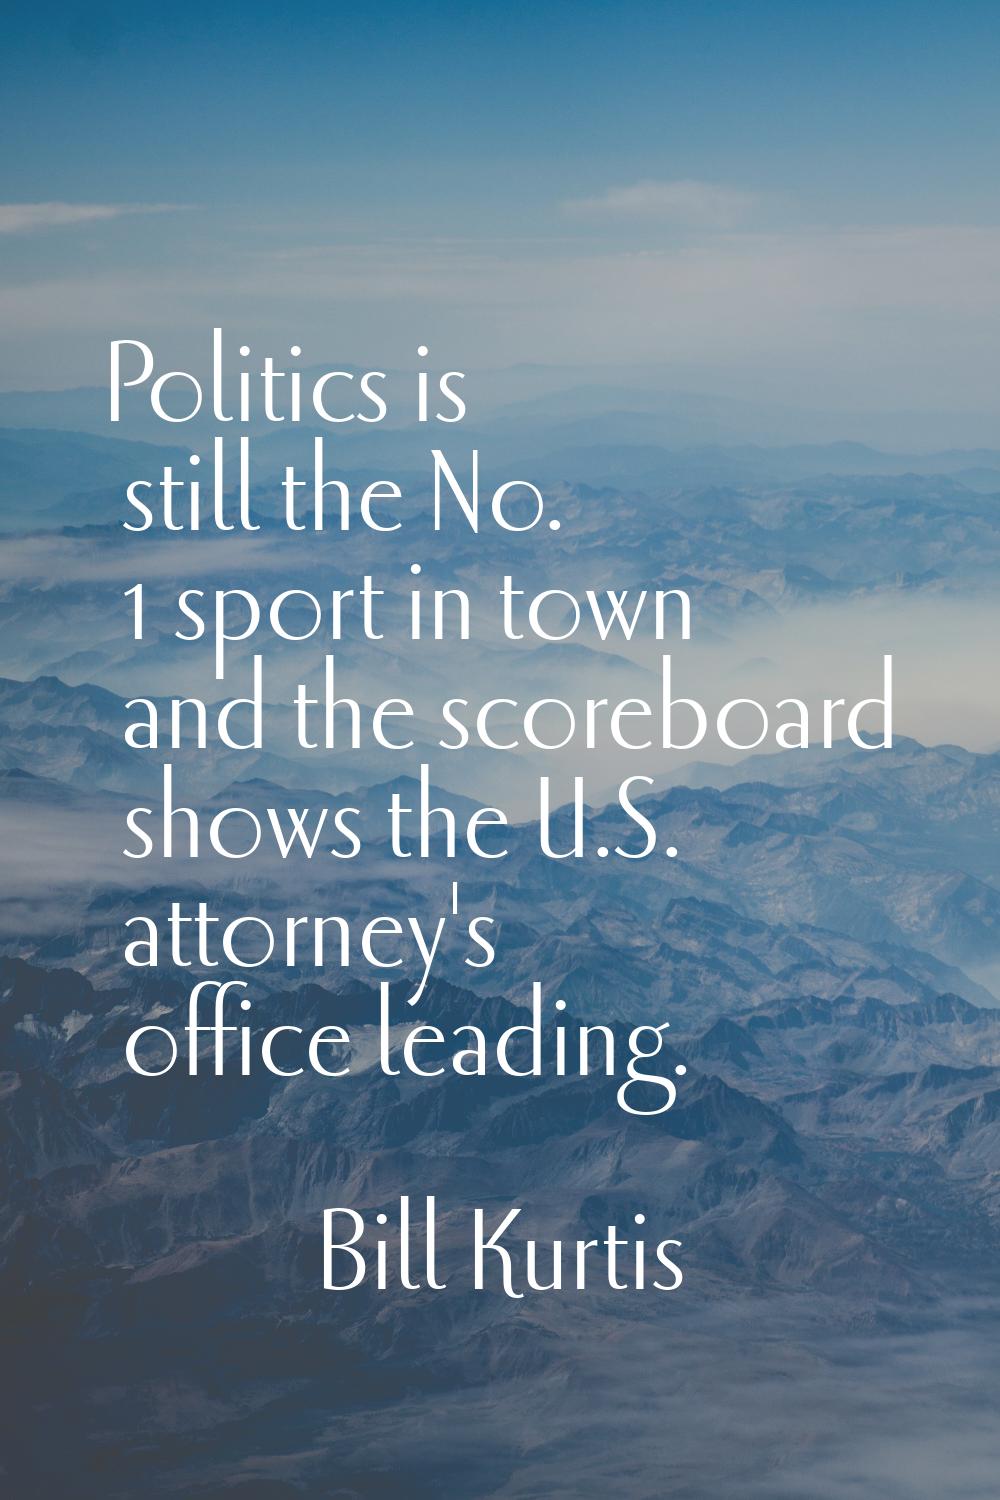 Politics is still the No. 1 sport in town and the scoreboard shows the U.S. attorney's office leadi